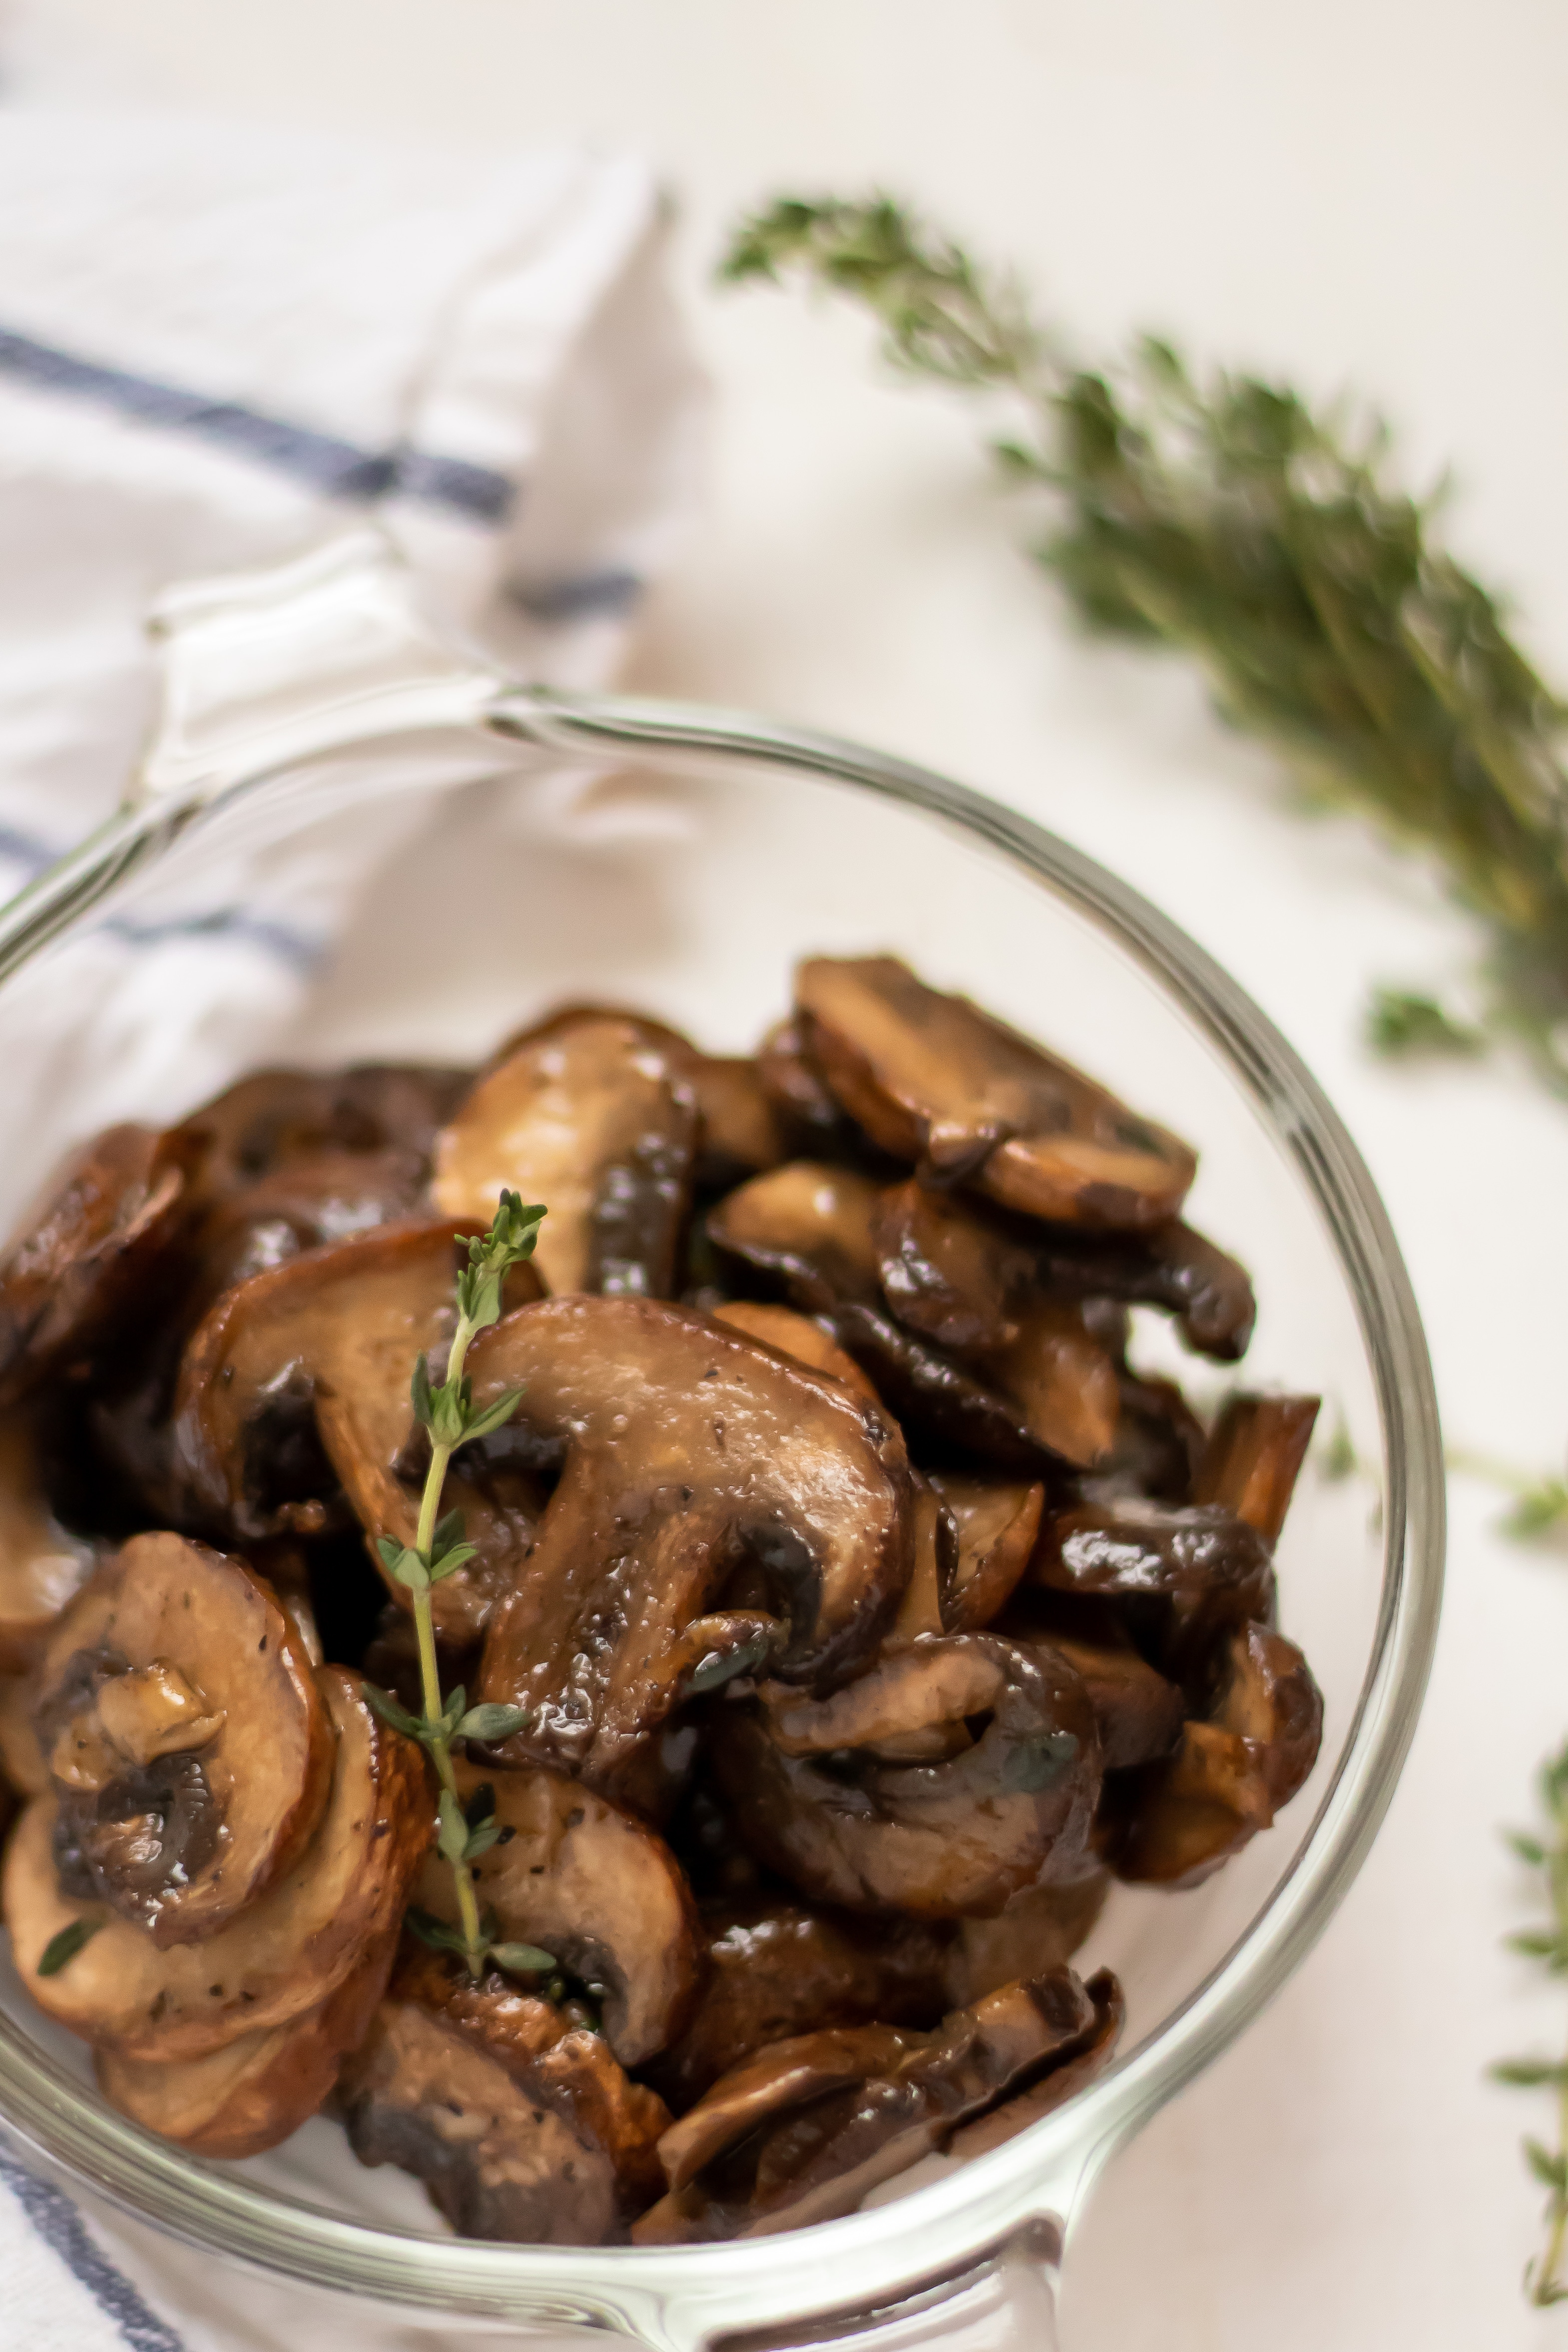 healthy, easy sauteed mushrooms in a glass bowl garnished with a sprig of thyme.